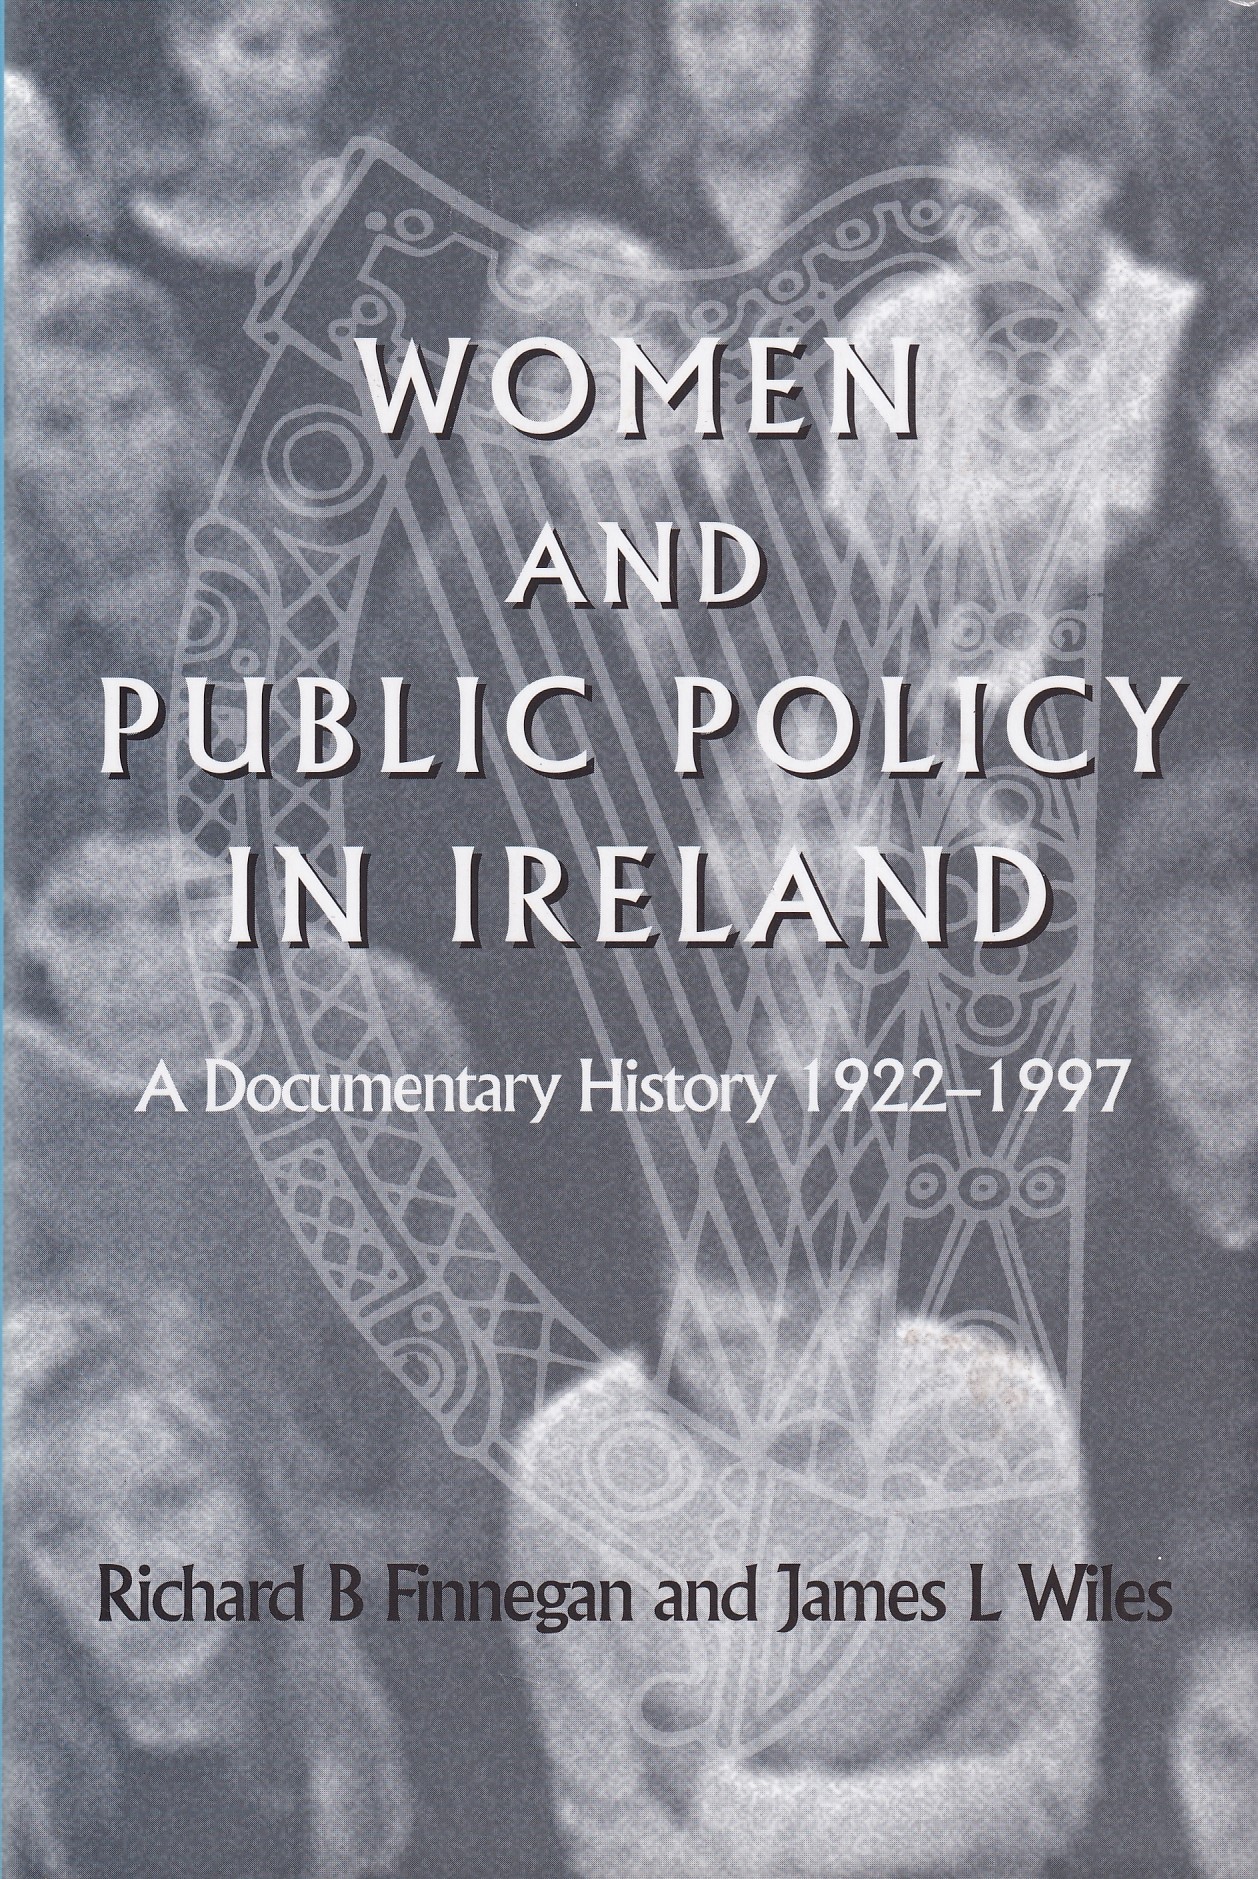 Women and Public Policy in Ireland: A Documentary History 1922-1997 | Richard B. Finnegan & James L. Wiles | Charlie Byrne's